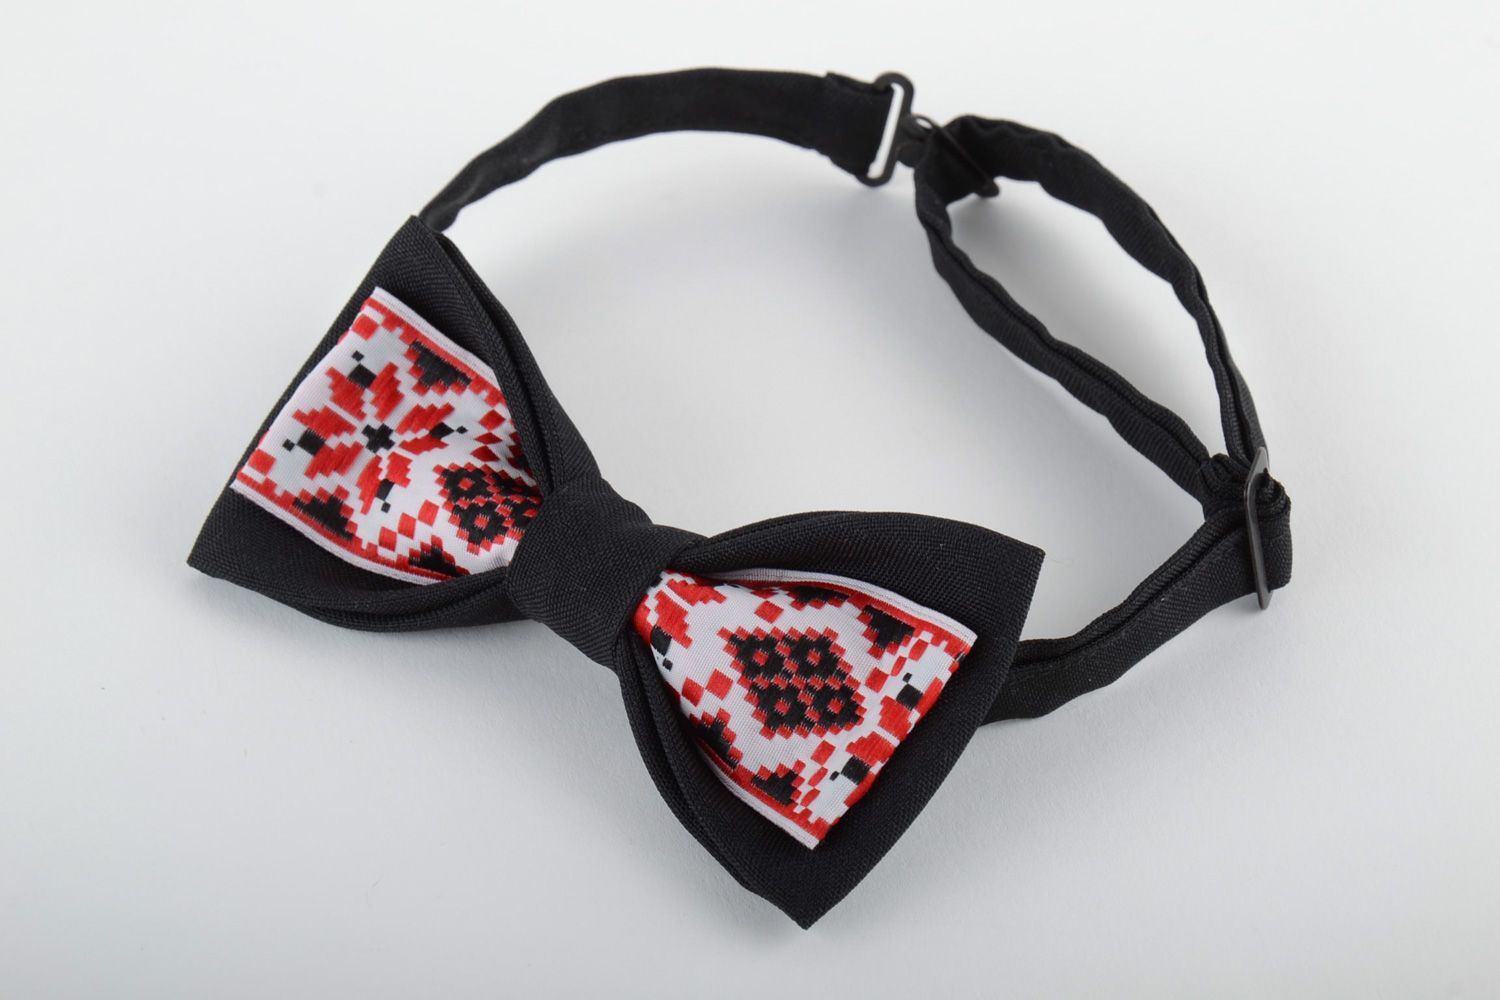 Handmade bow tie sewn of black and ornamented costume fabric in ethnic style photo 2